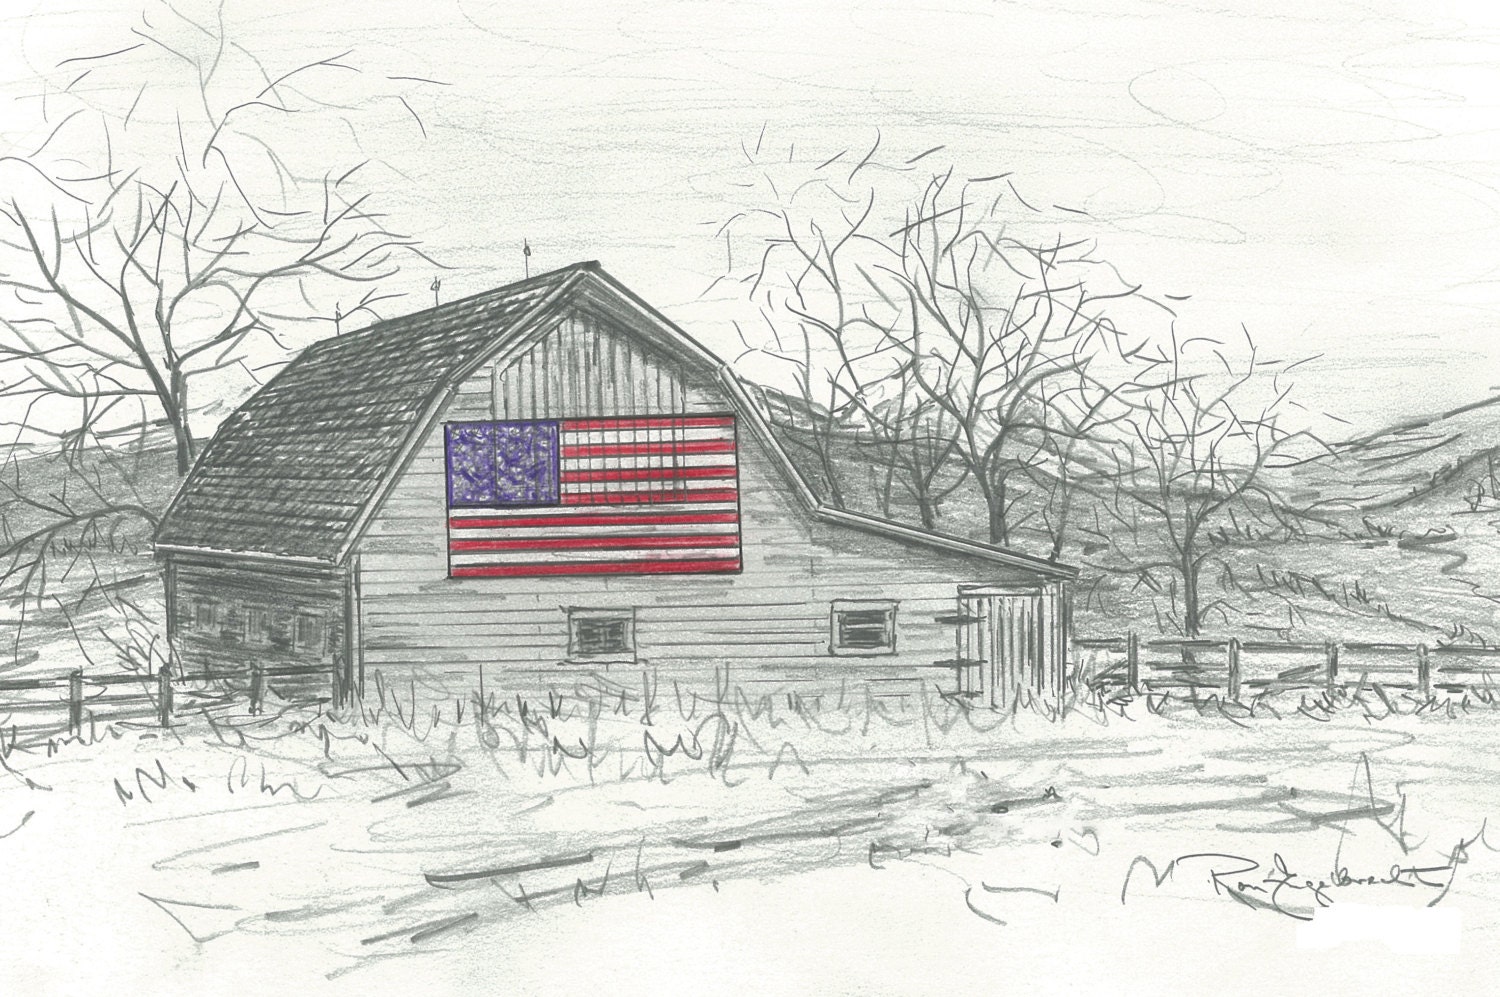 39 Top Photos Sketches Of Old Barns - White Barn On Bluff Road Drawing by Garry McMichael